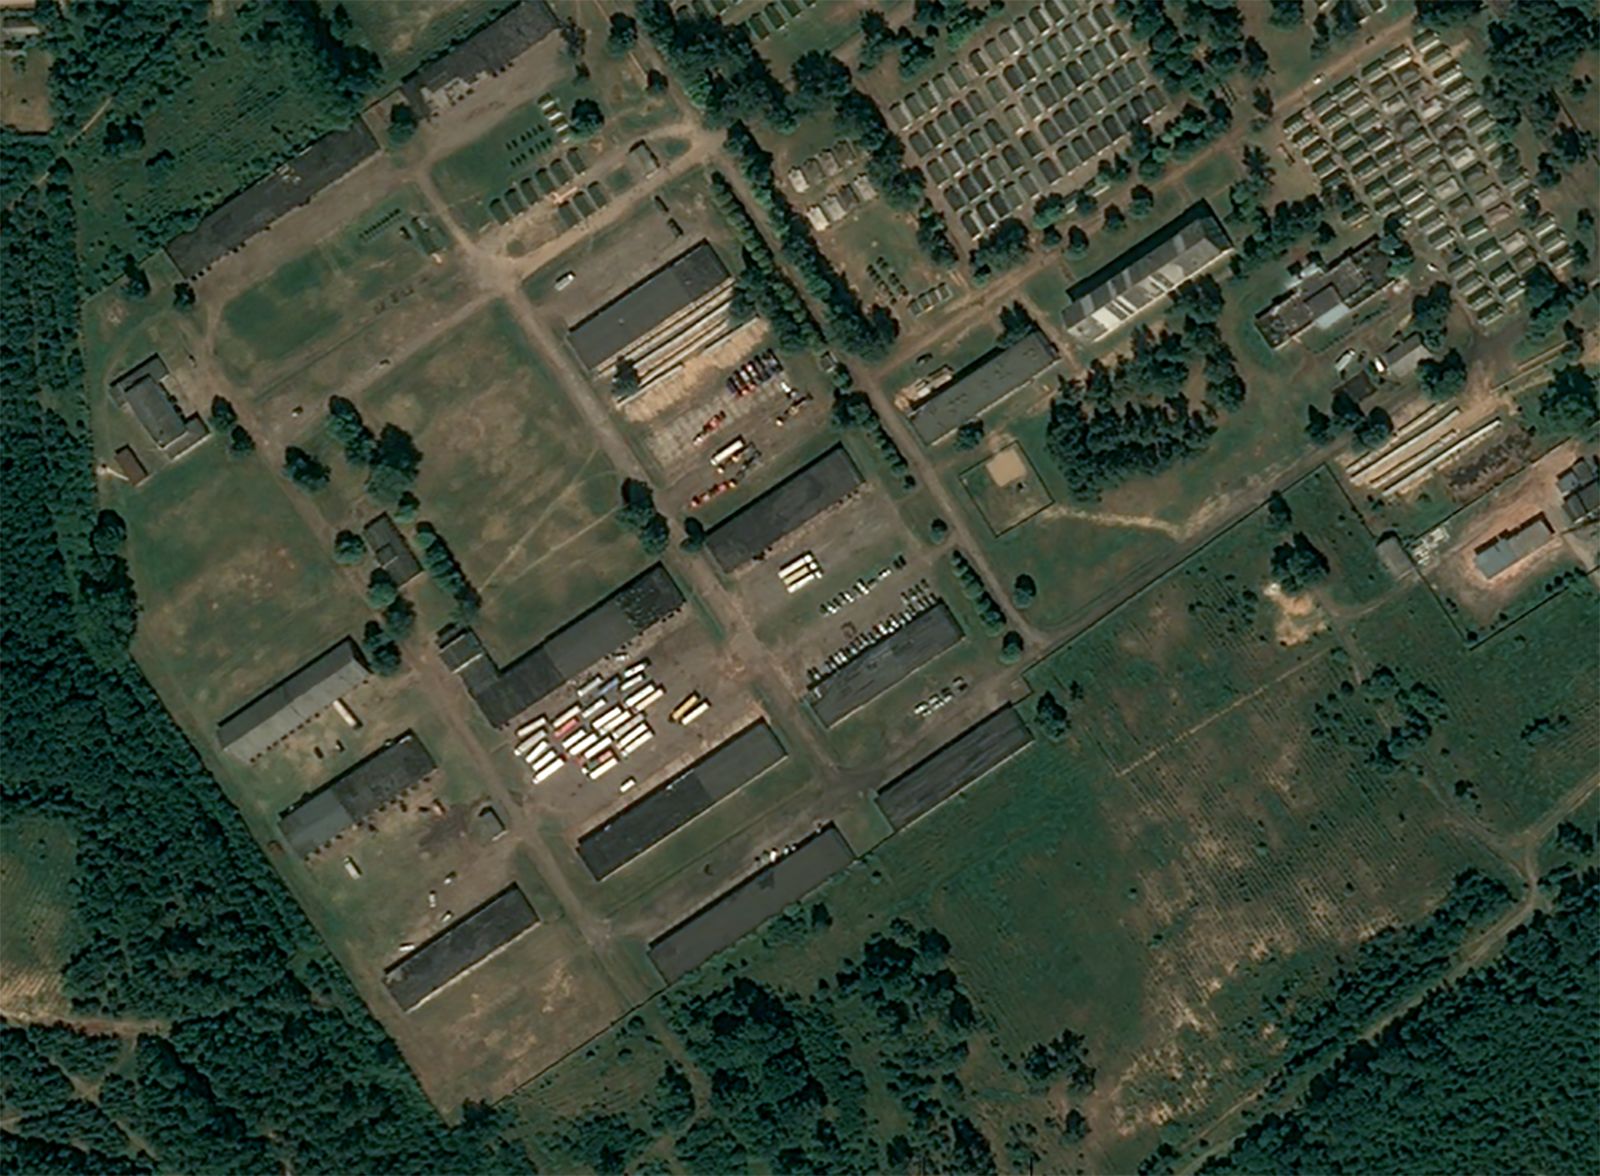 A satellite image shows the first convoy of Wagner forces arriving at a Belarusian base on July 17.